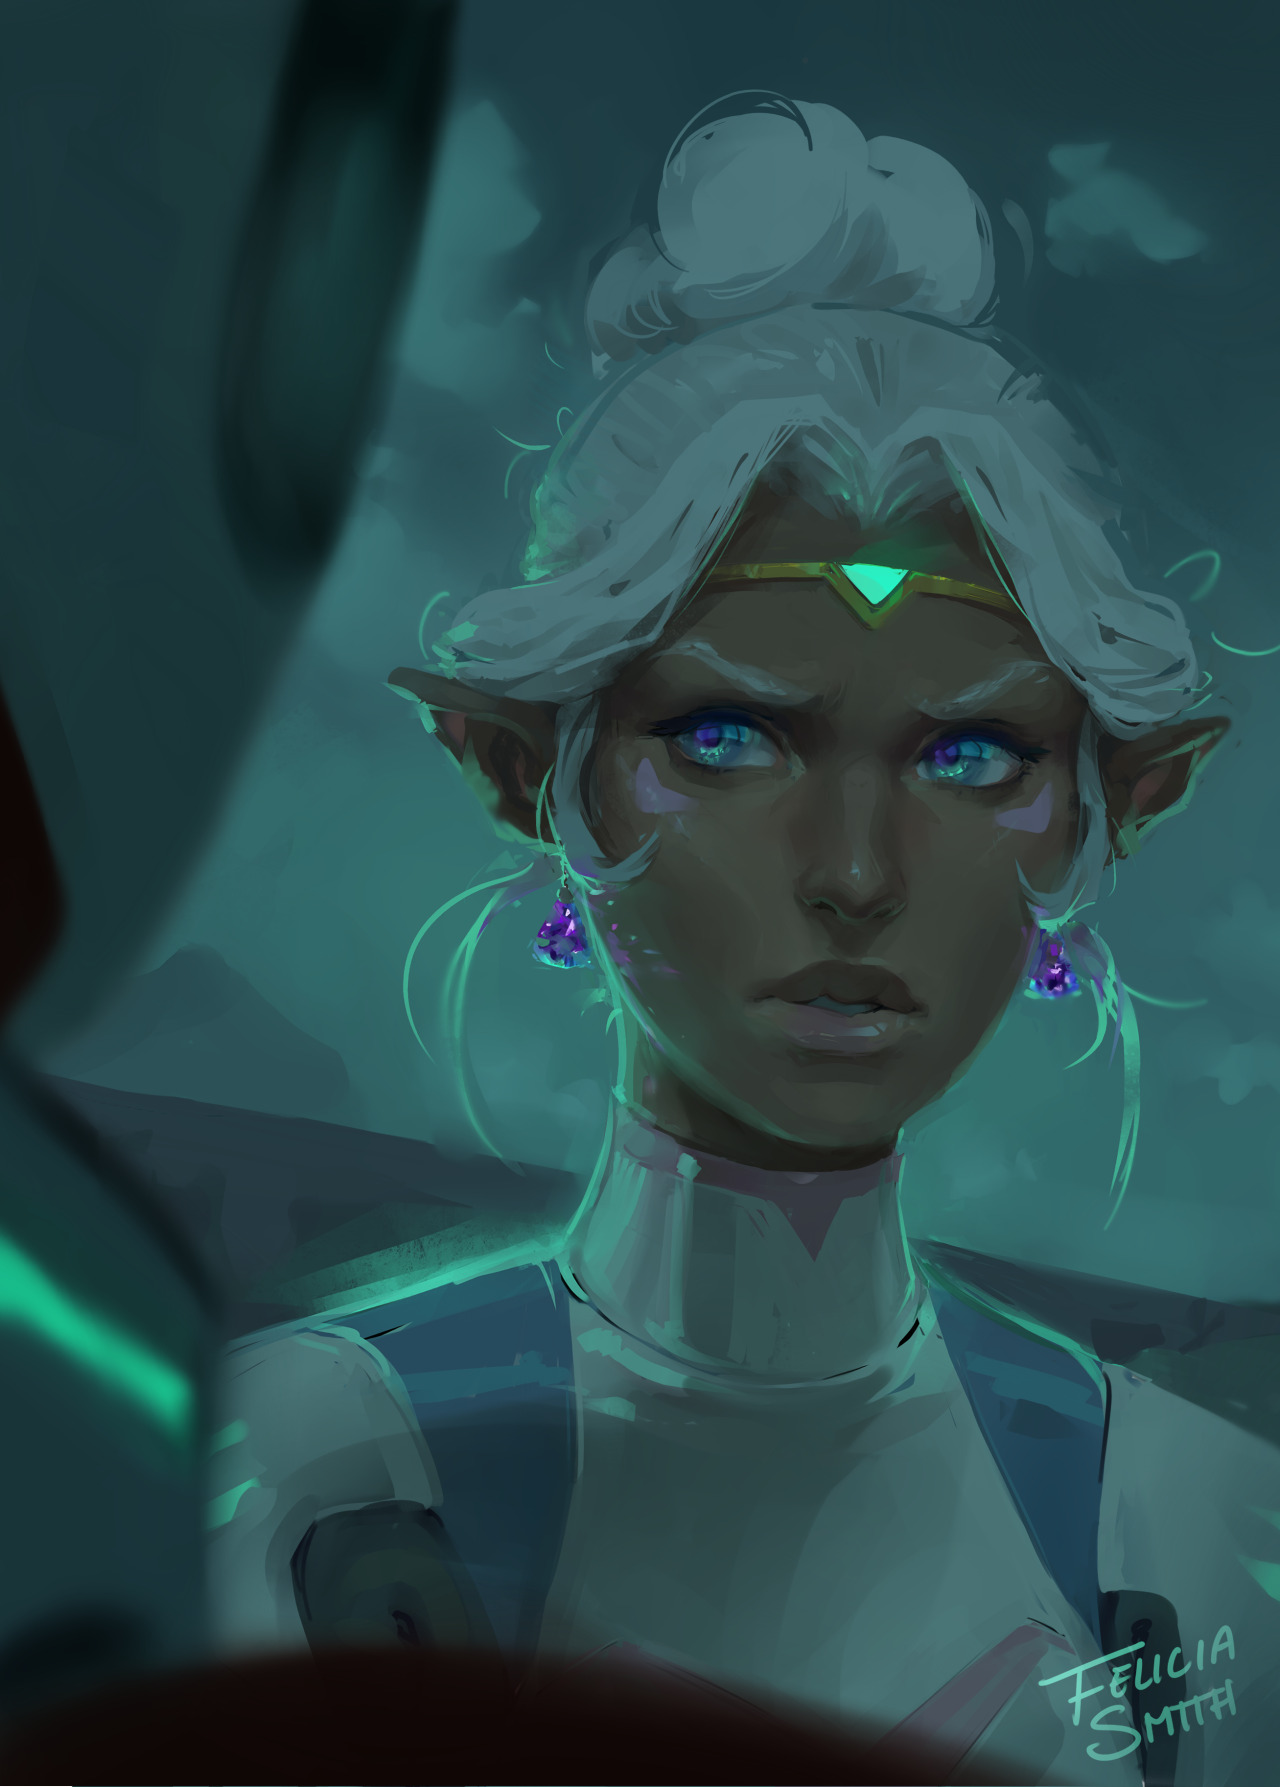 the-exsalted-one:  //cries into hands// i just wanted to paint alien space princess